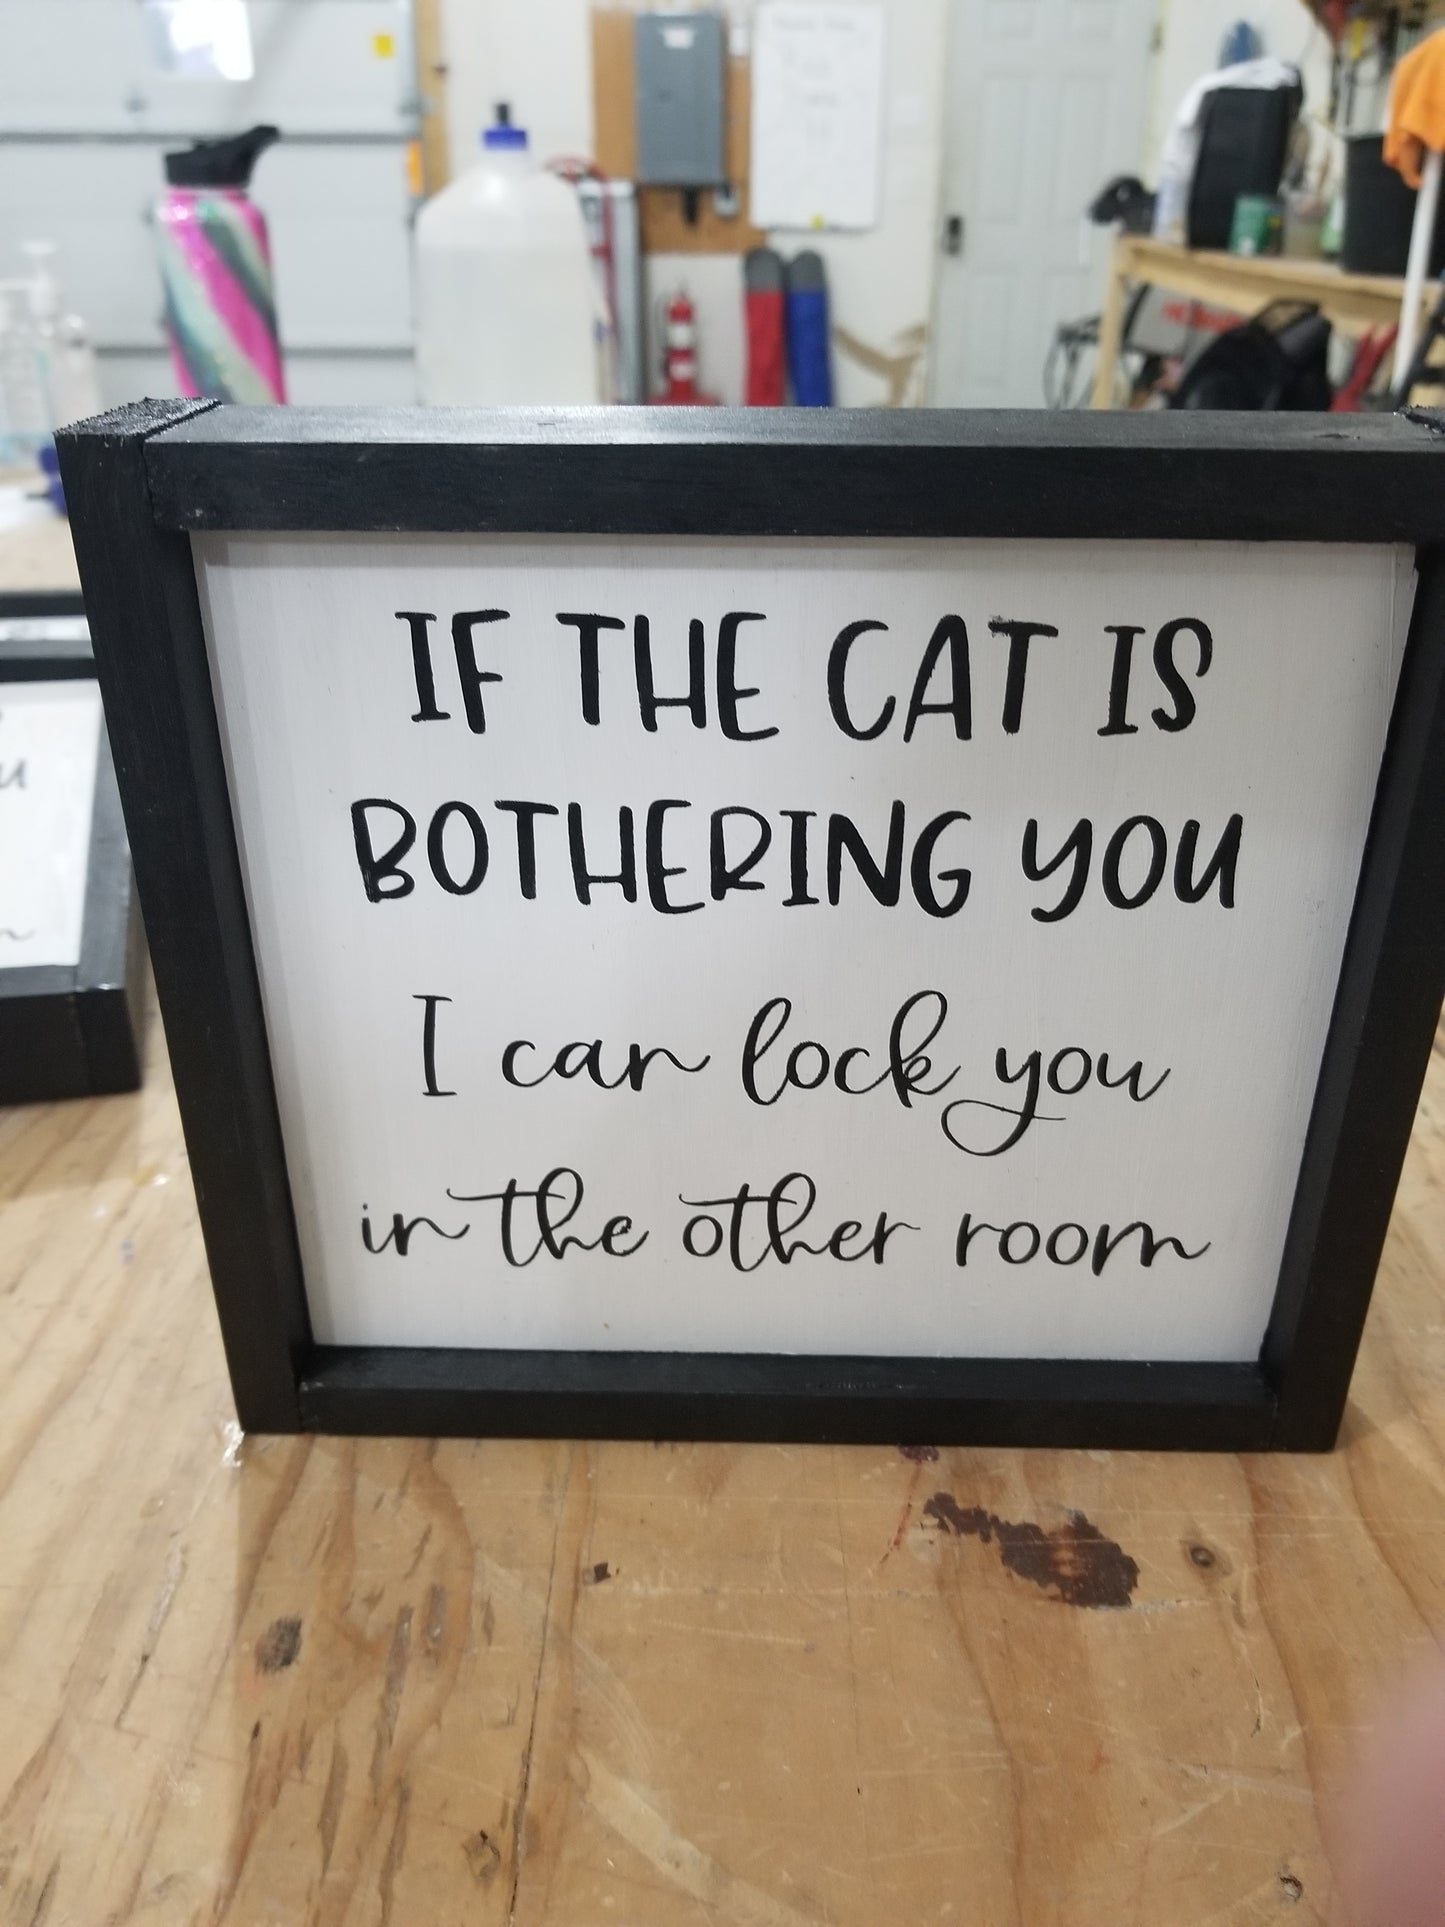 If the cat is bothering you